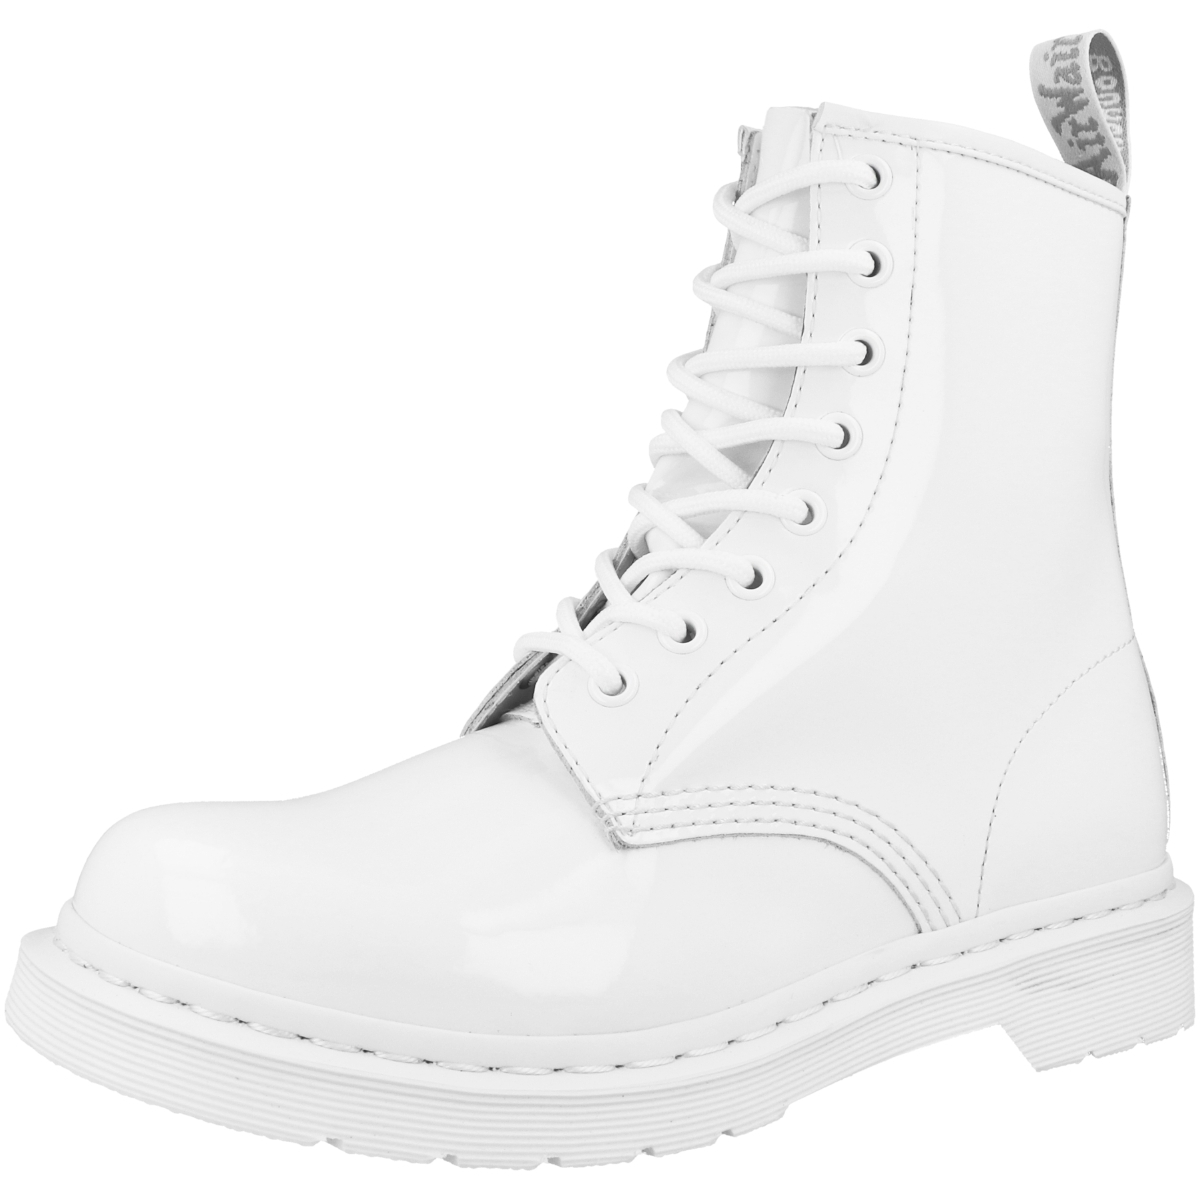 Dr. Martens 1460 Mono Boots weiss